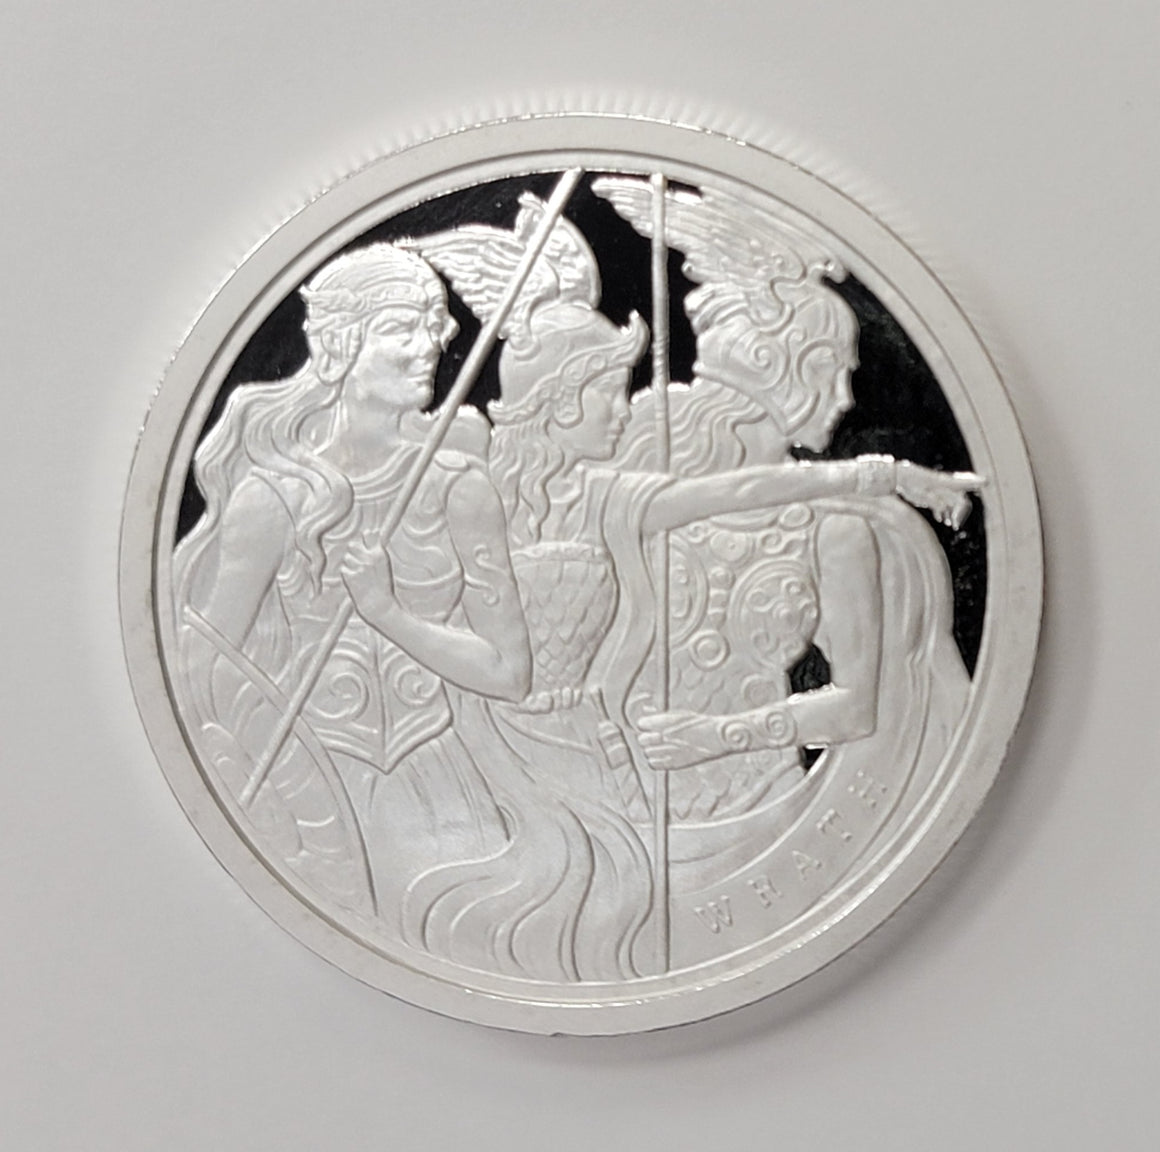 Wrath: Seven Deadly Sins - PROOF Finish by Pheli Mint, 2oz .999 Fine Silver Round